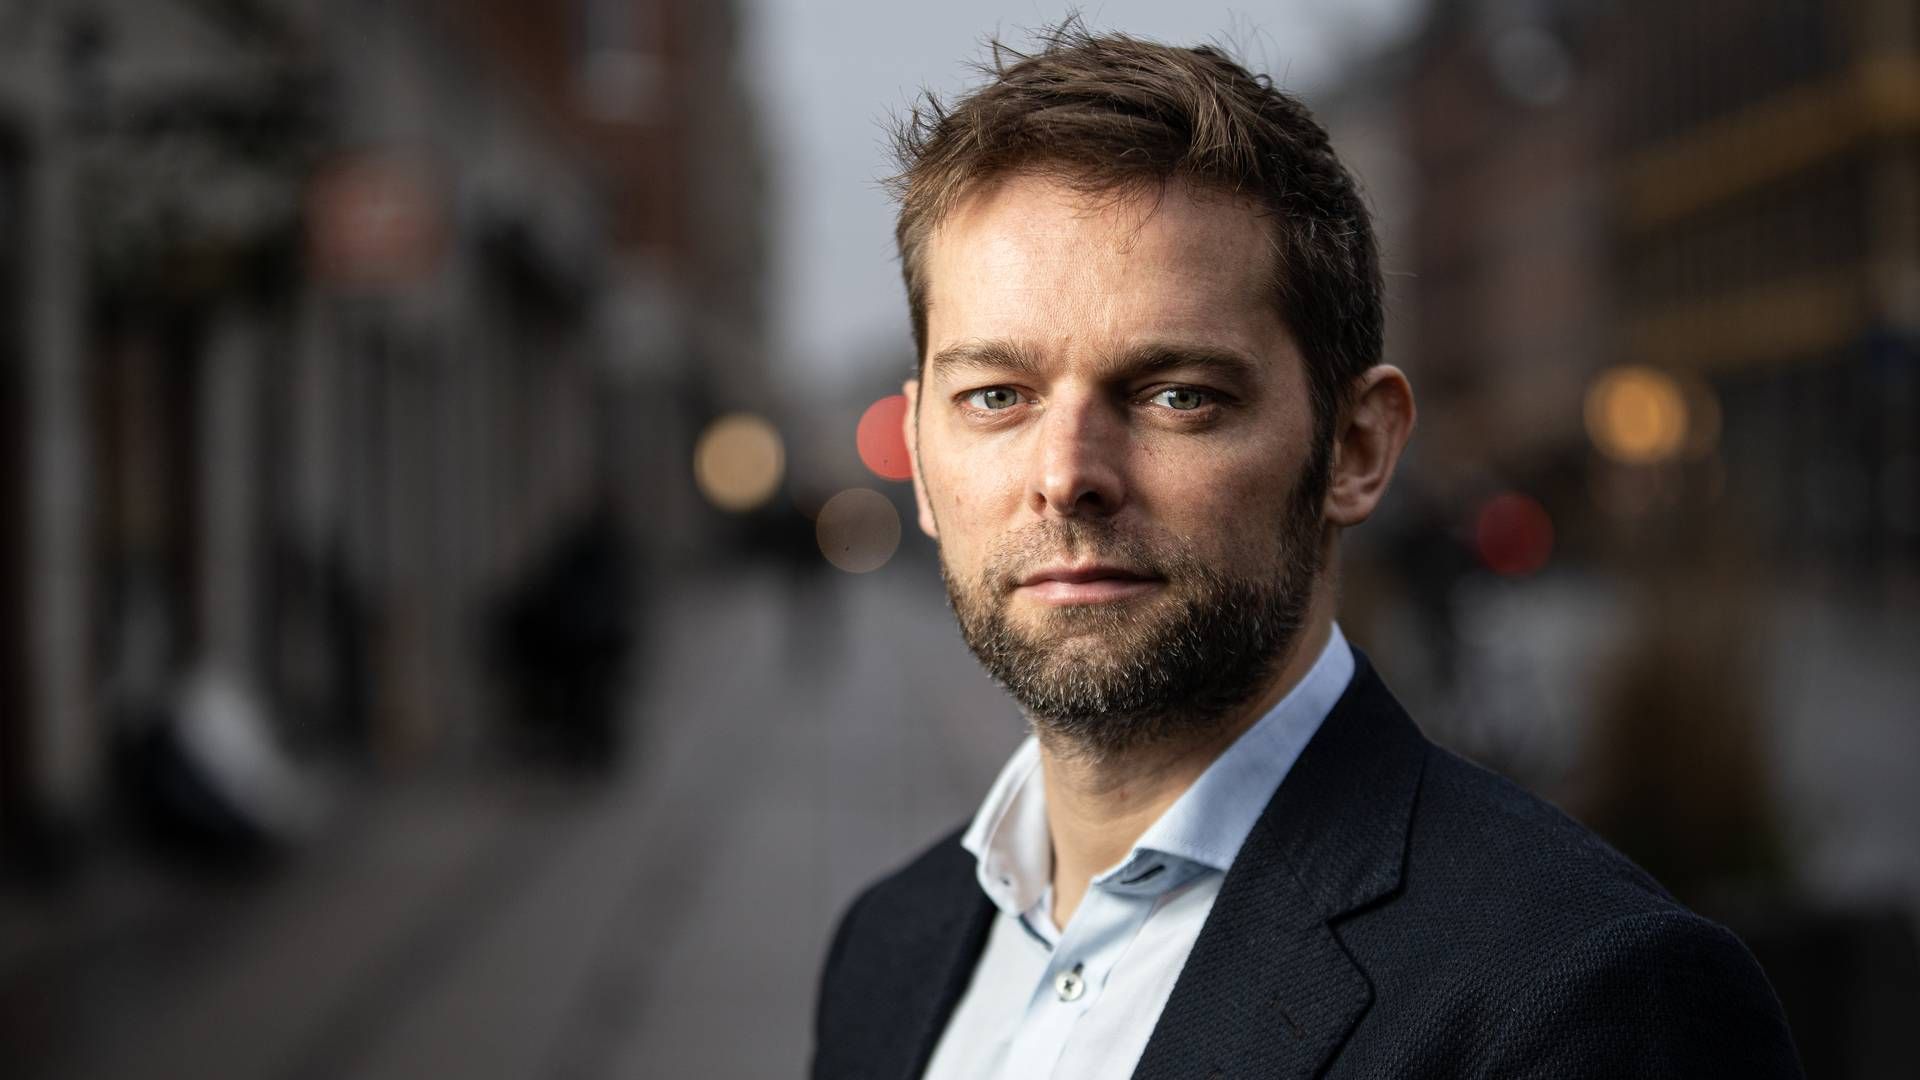 “Our success in Denmark has confirmed our belief that there is a need for independent, critical and fair financial journalism with a focus on substance. Now, we are ready to launch our concept abroad,” says Watch Medier CEO Anders Heering | Photo: Watch Medier/Jan Bjarke Mindegaard